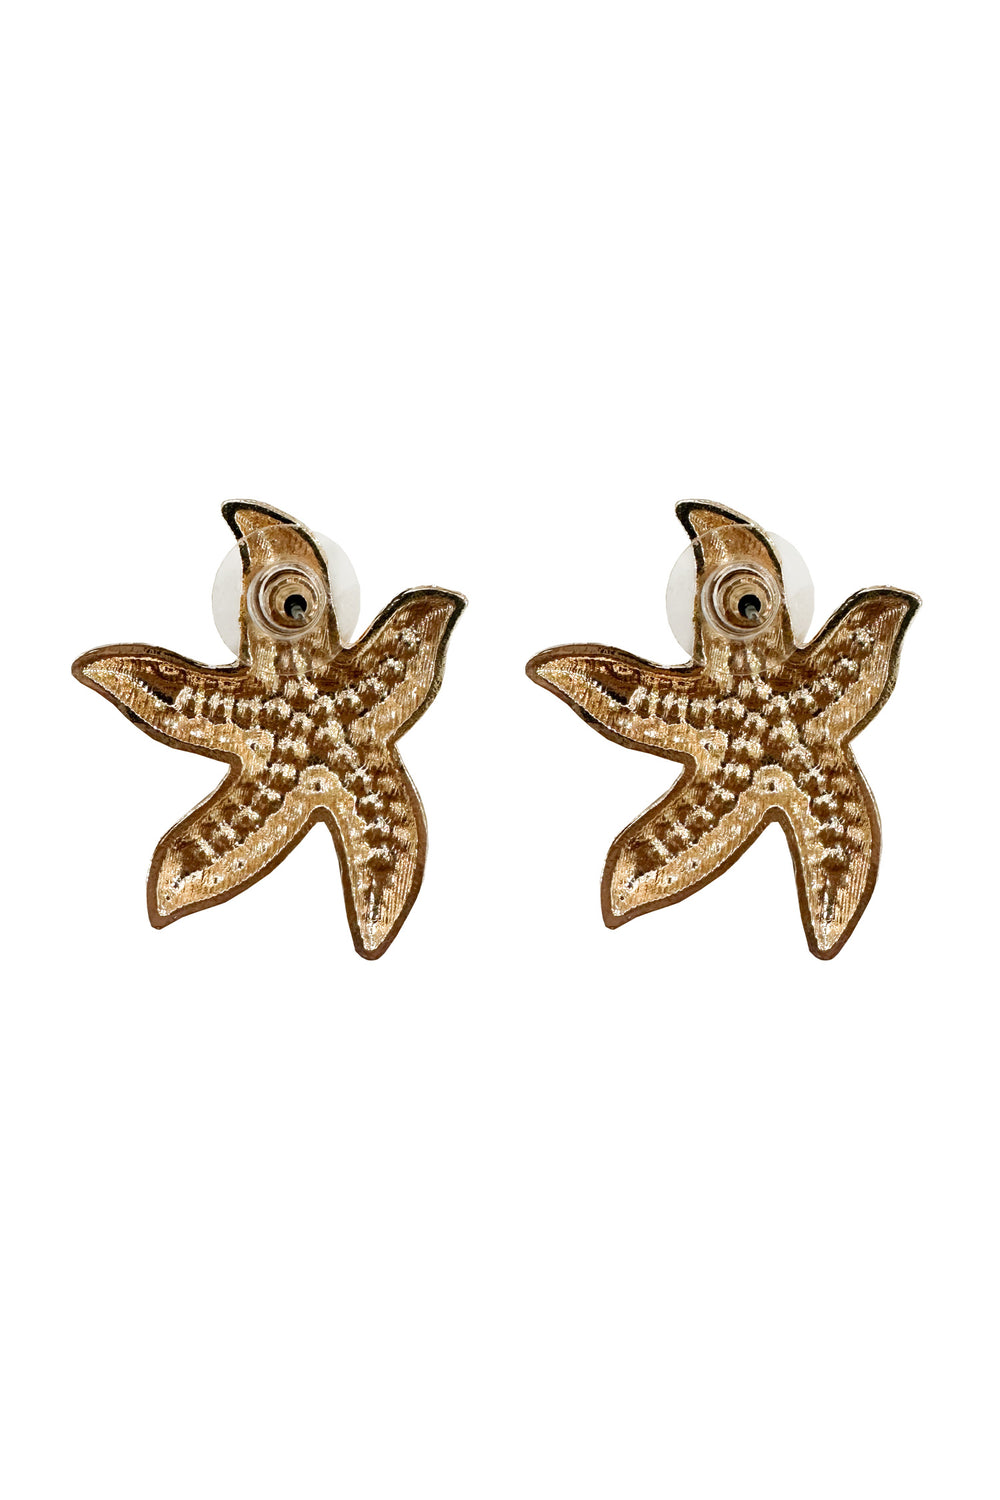 Reverse side of starfish-shaped earrings showcasing a polished finish with a secure backing, revealing the intricate craftsmanship and attention to detail in the design.